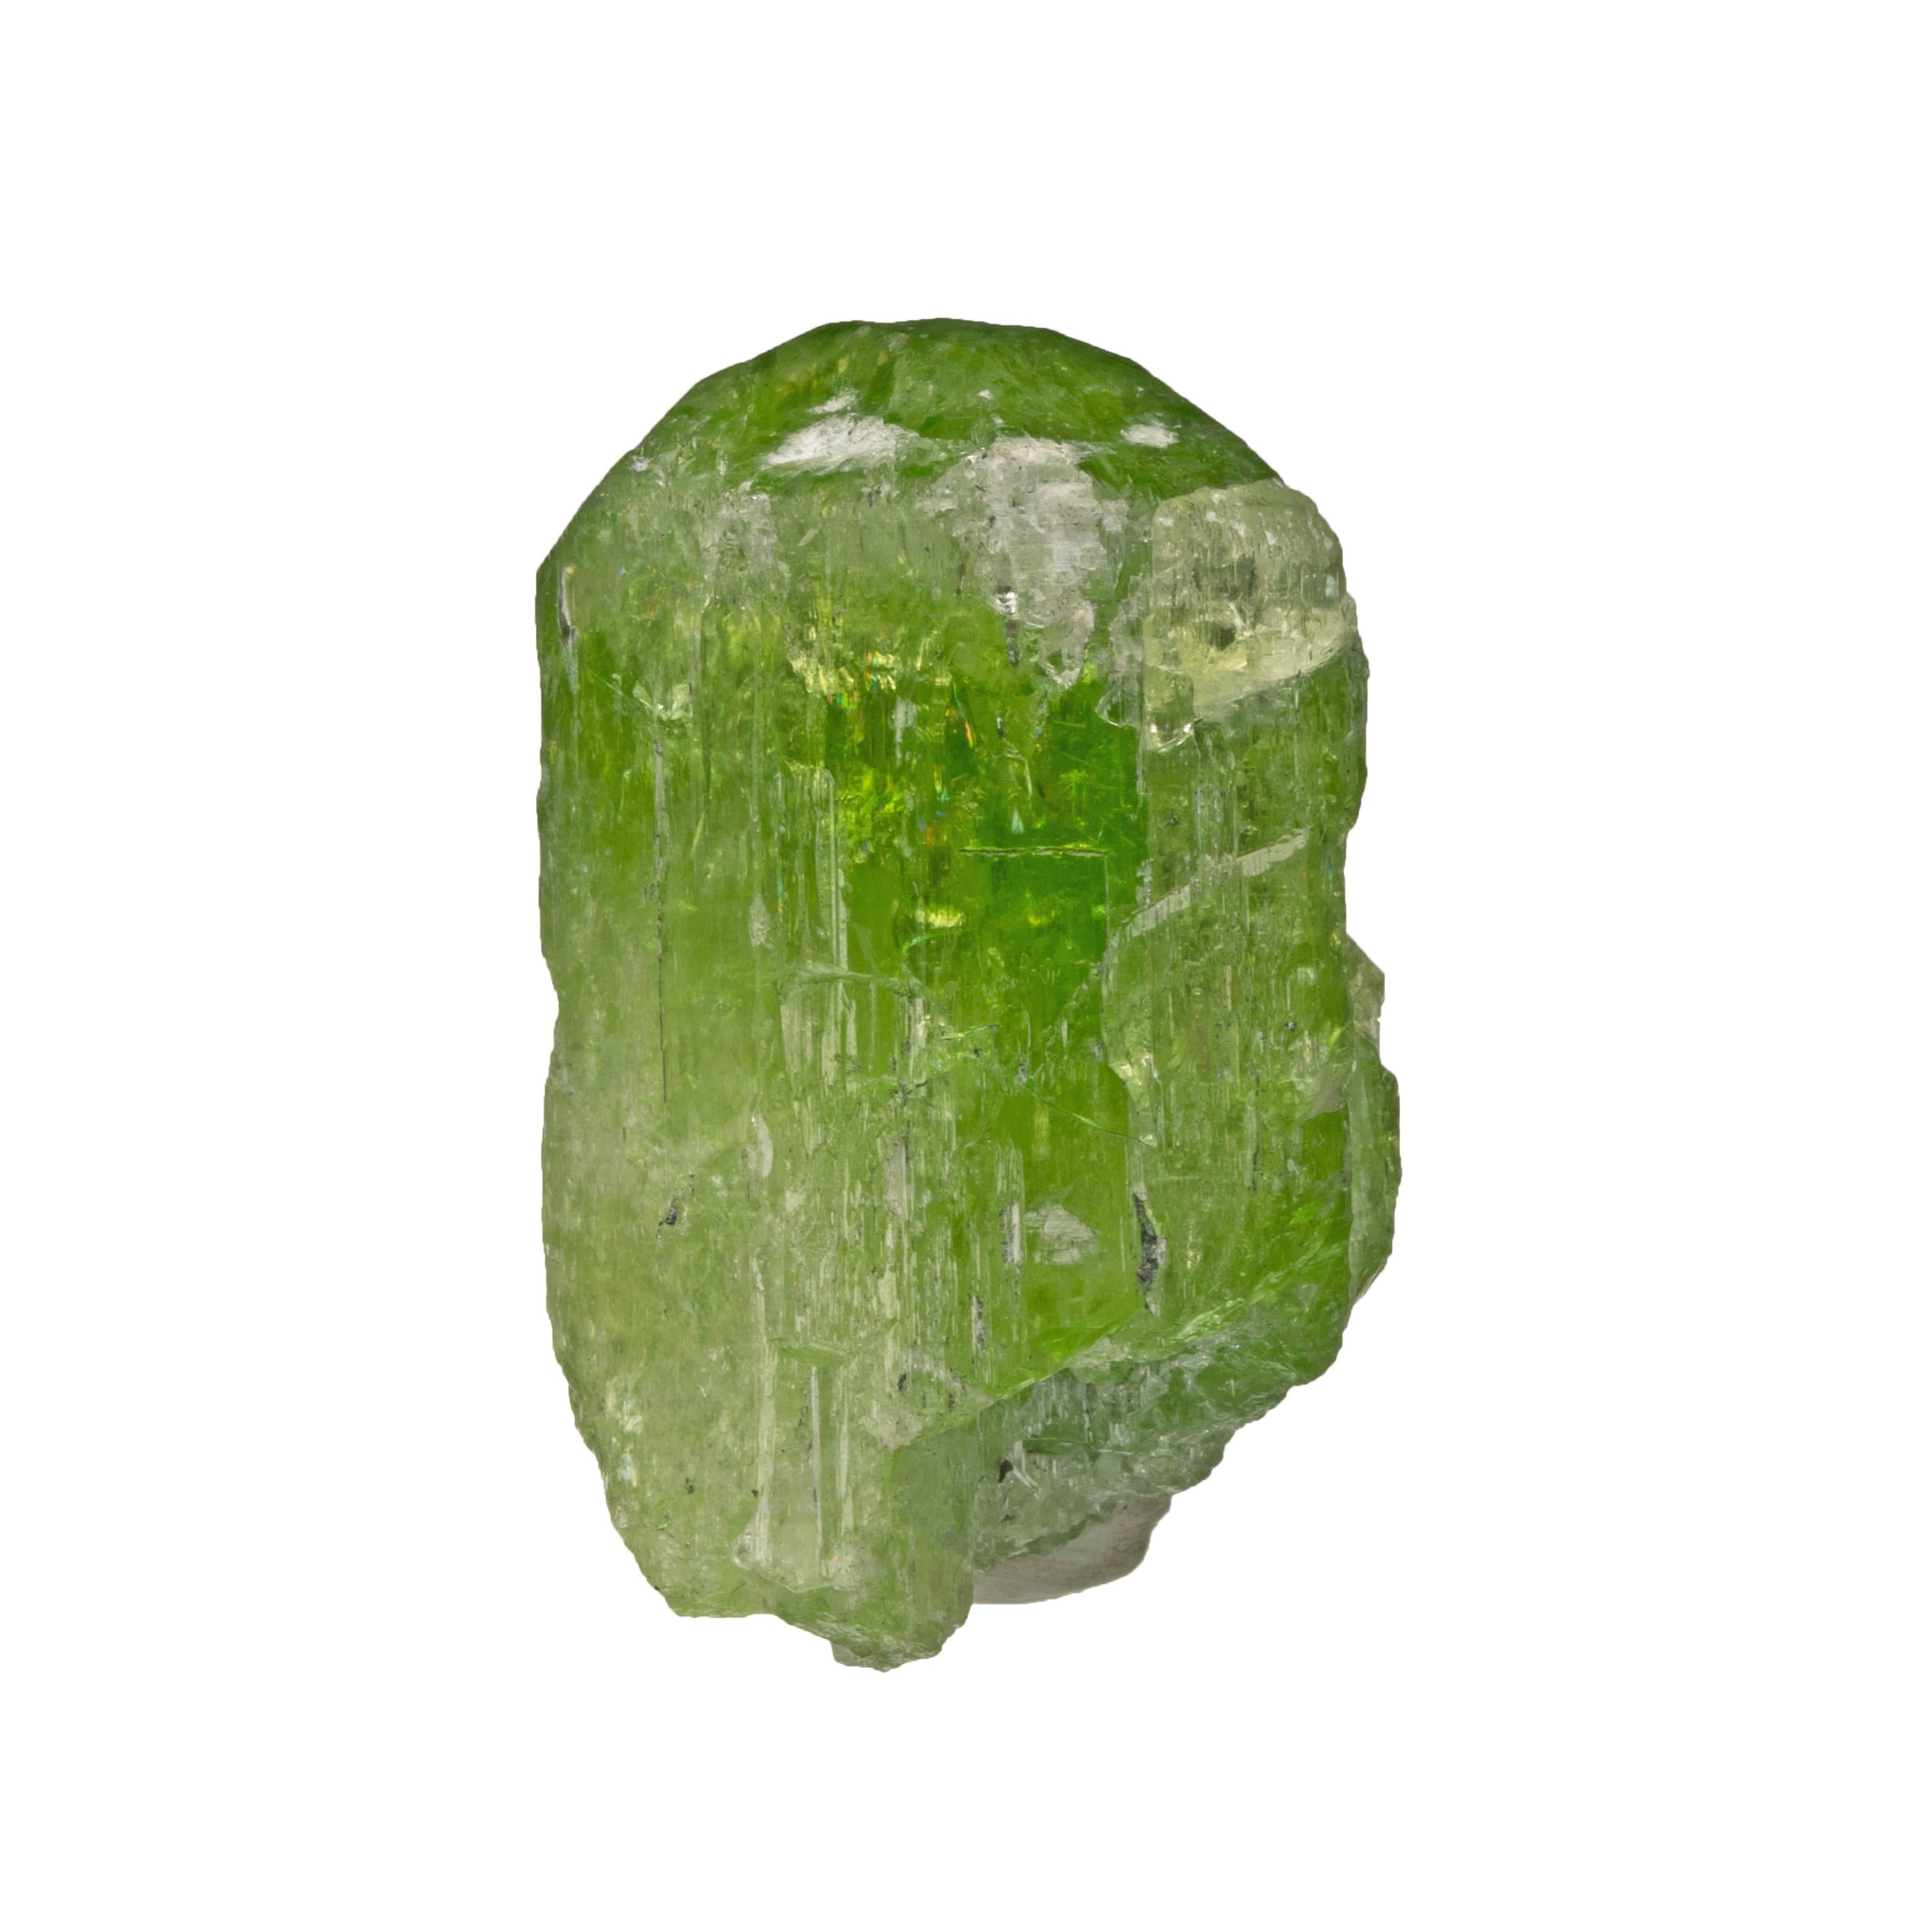 From Merelani Hills in Tanzania, this gemmy, verdant chrome diopside features a beautiful natural termination and incredible pigmentation. This excellent gem crystal specimen will add the perfect pop of green to your cabinet.

Dimensions: 1”L x